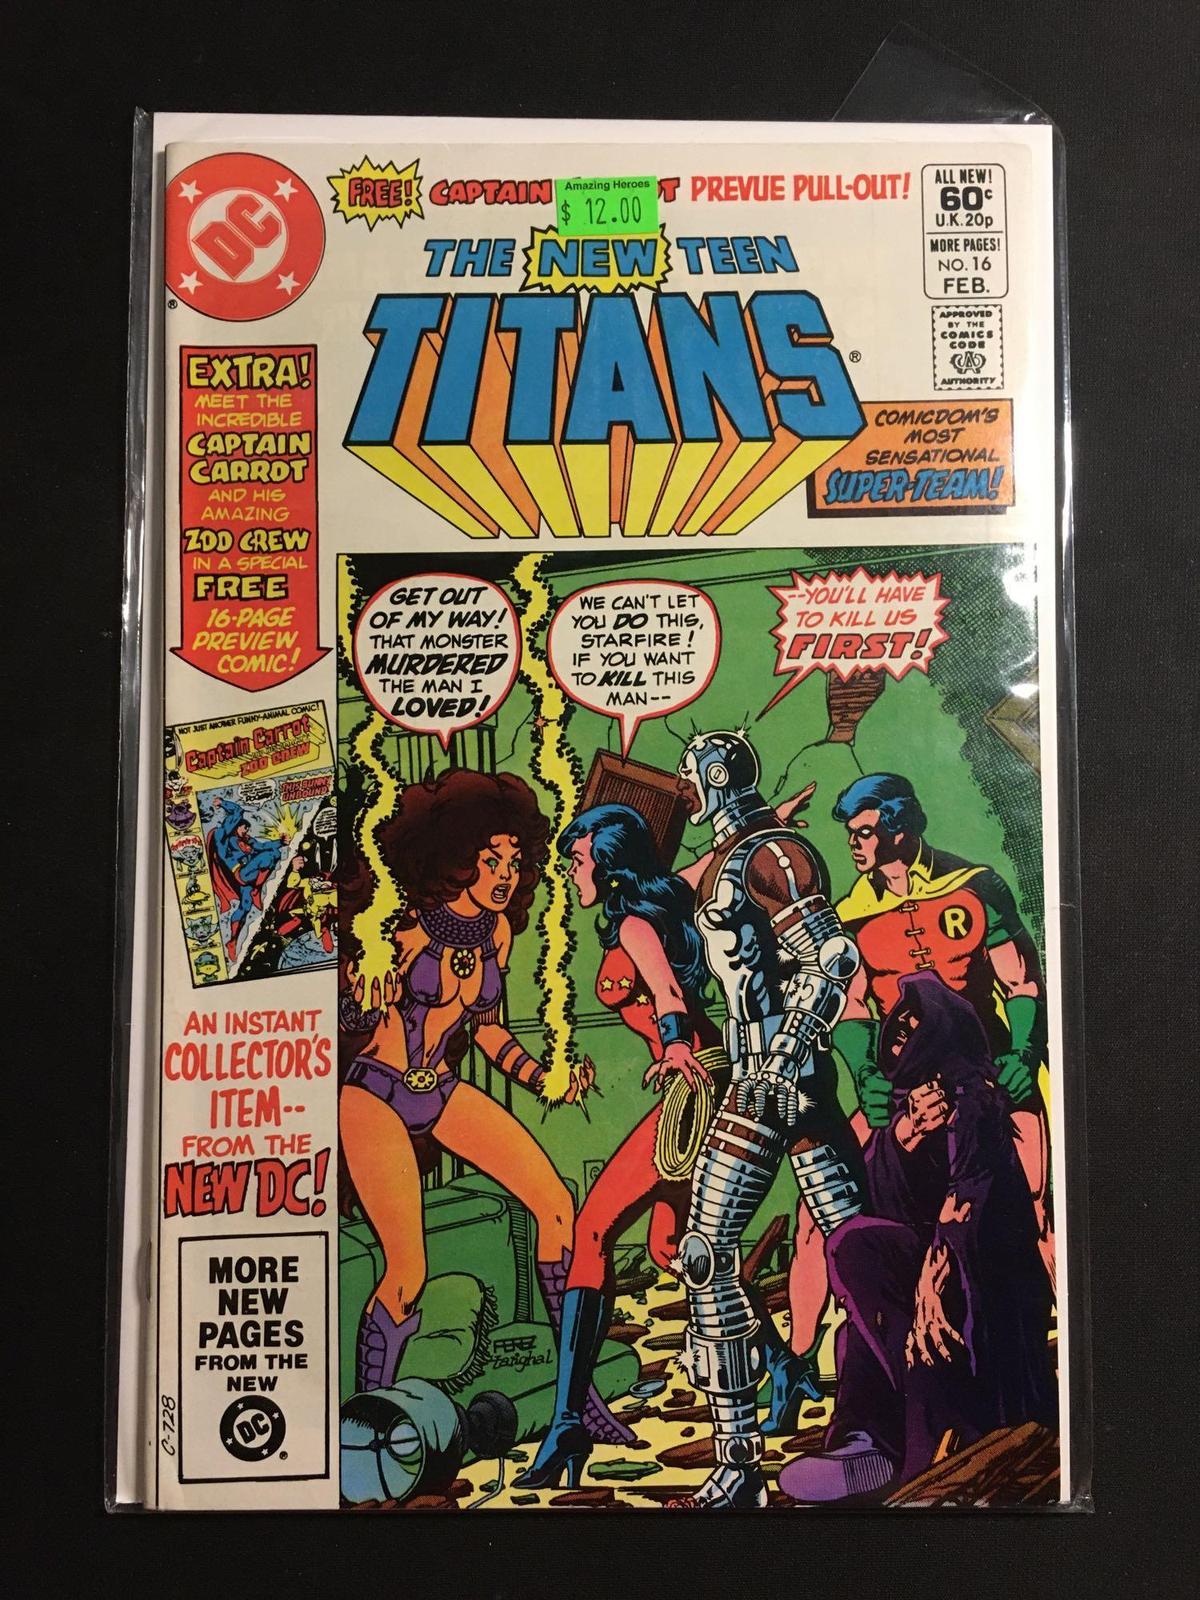 The New Teen Titans #16 Comic Book from Amazing Collection B